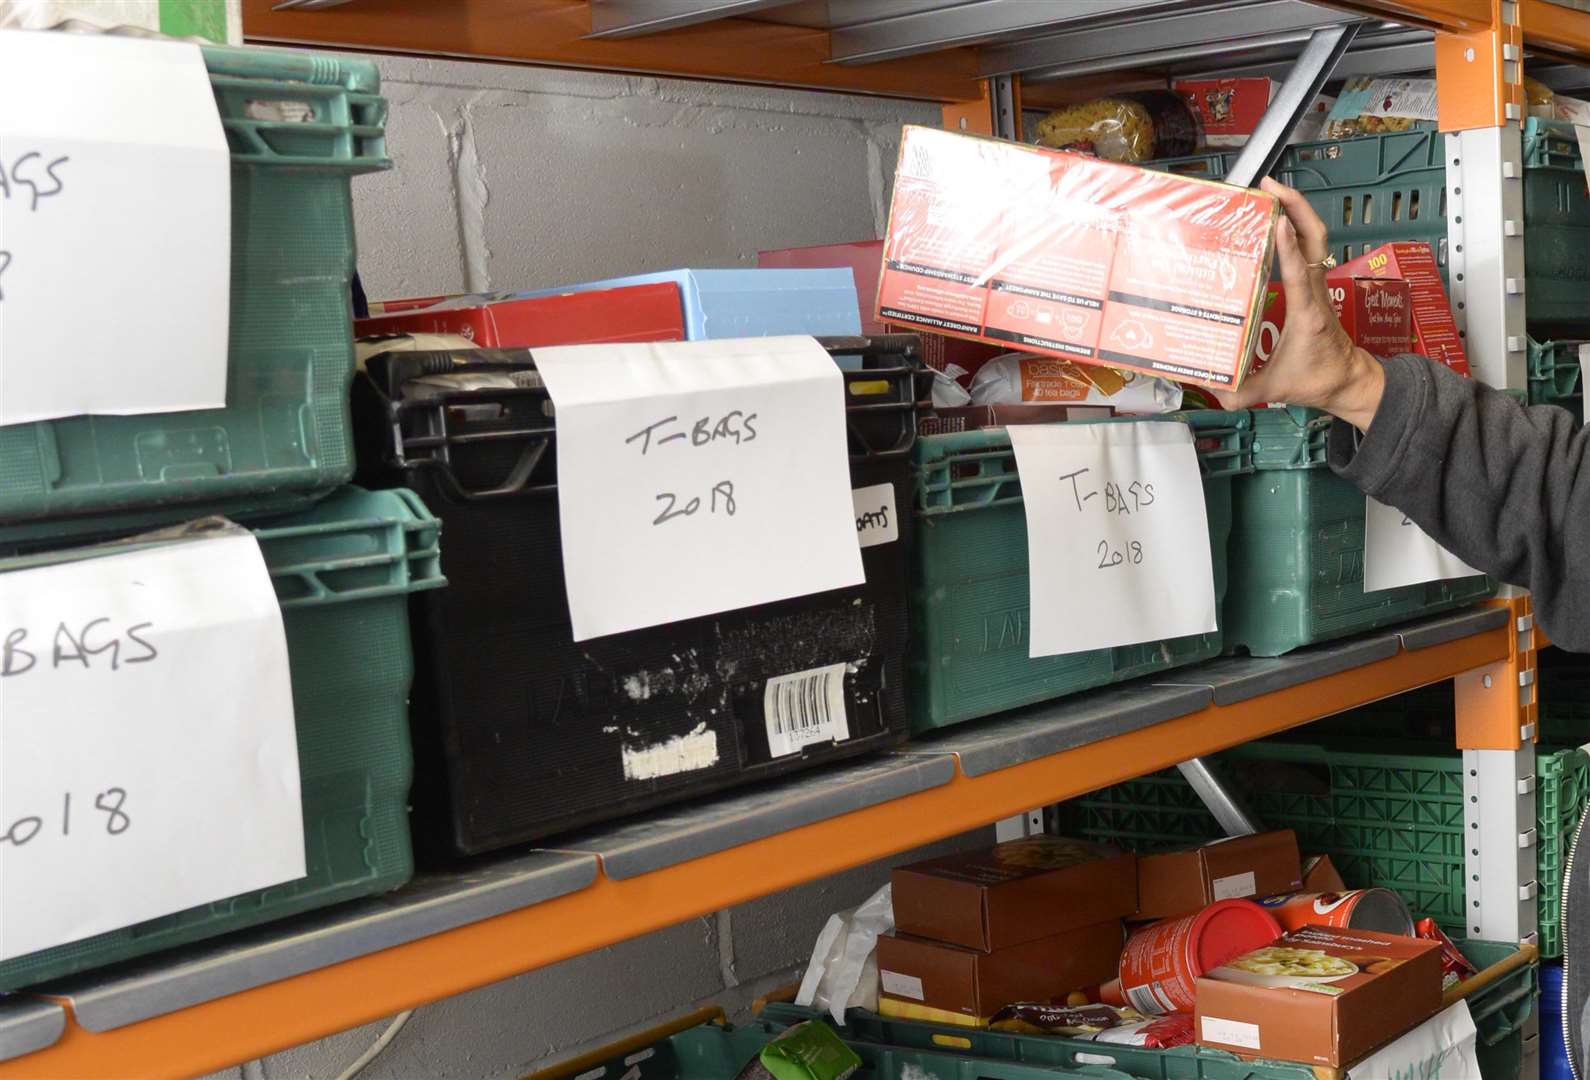 Debt is thought to be one of the biggest reasons for people visiting foodbanks